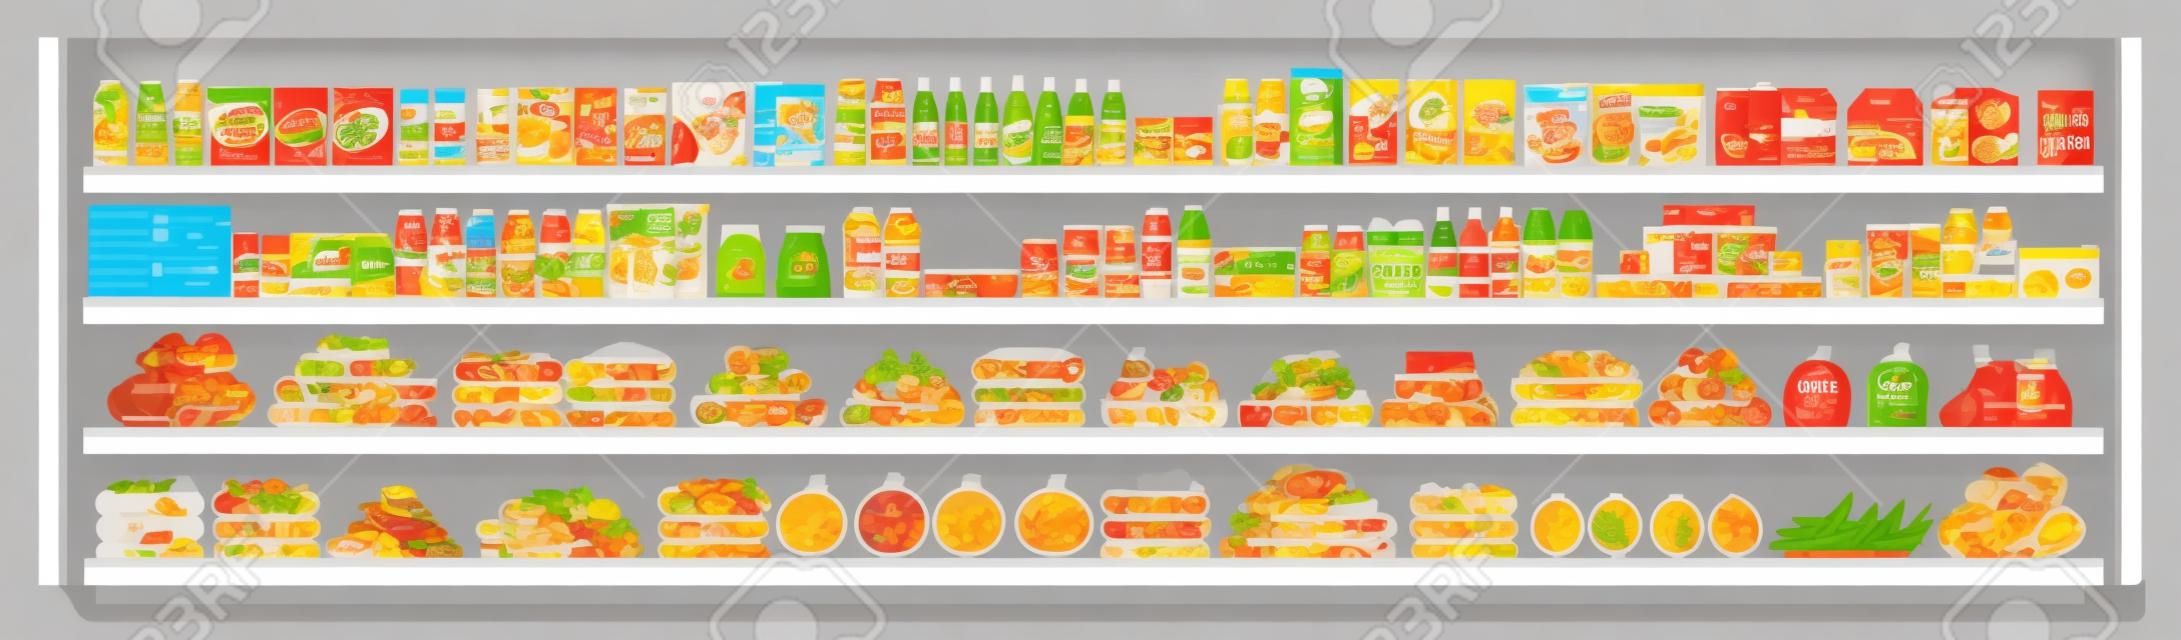 Grocery items on the supermarket shelves and offers full with assortment of food and drinks flat vector seamless background illustration. Shopping and retail concept.